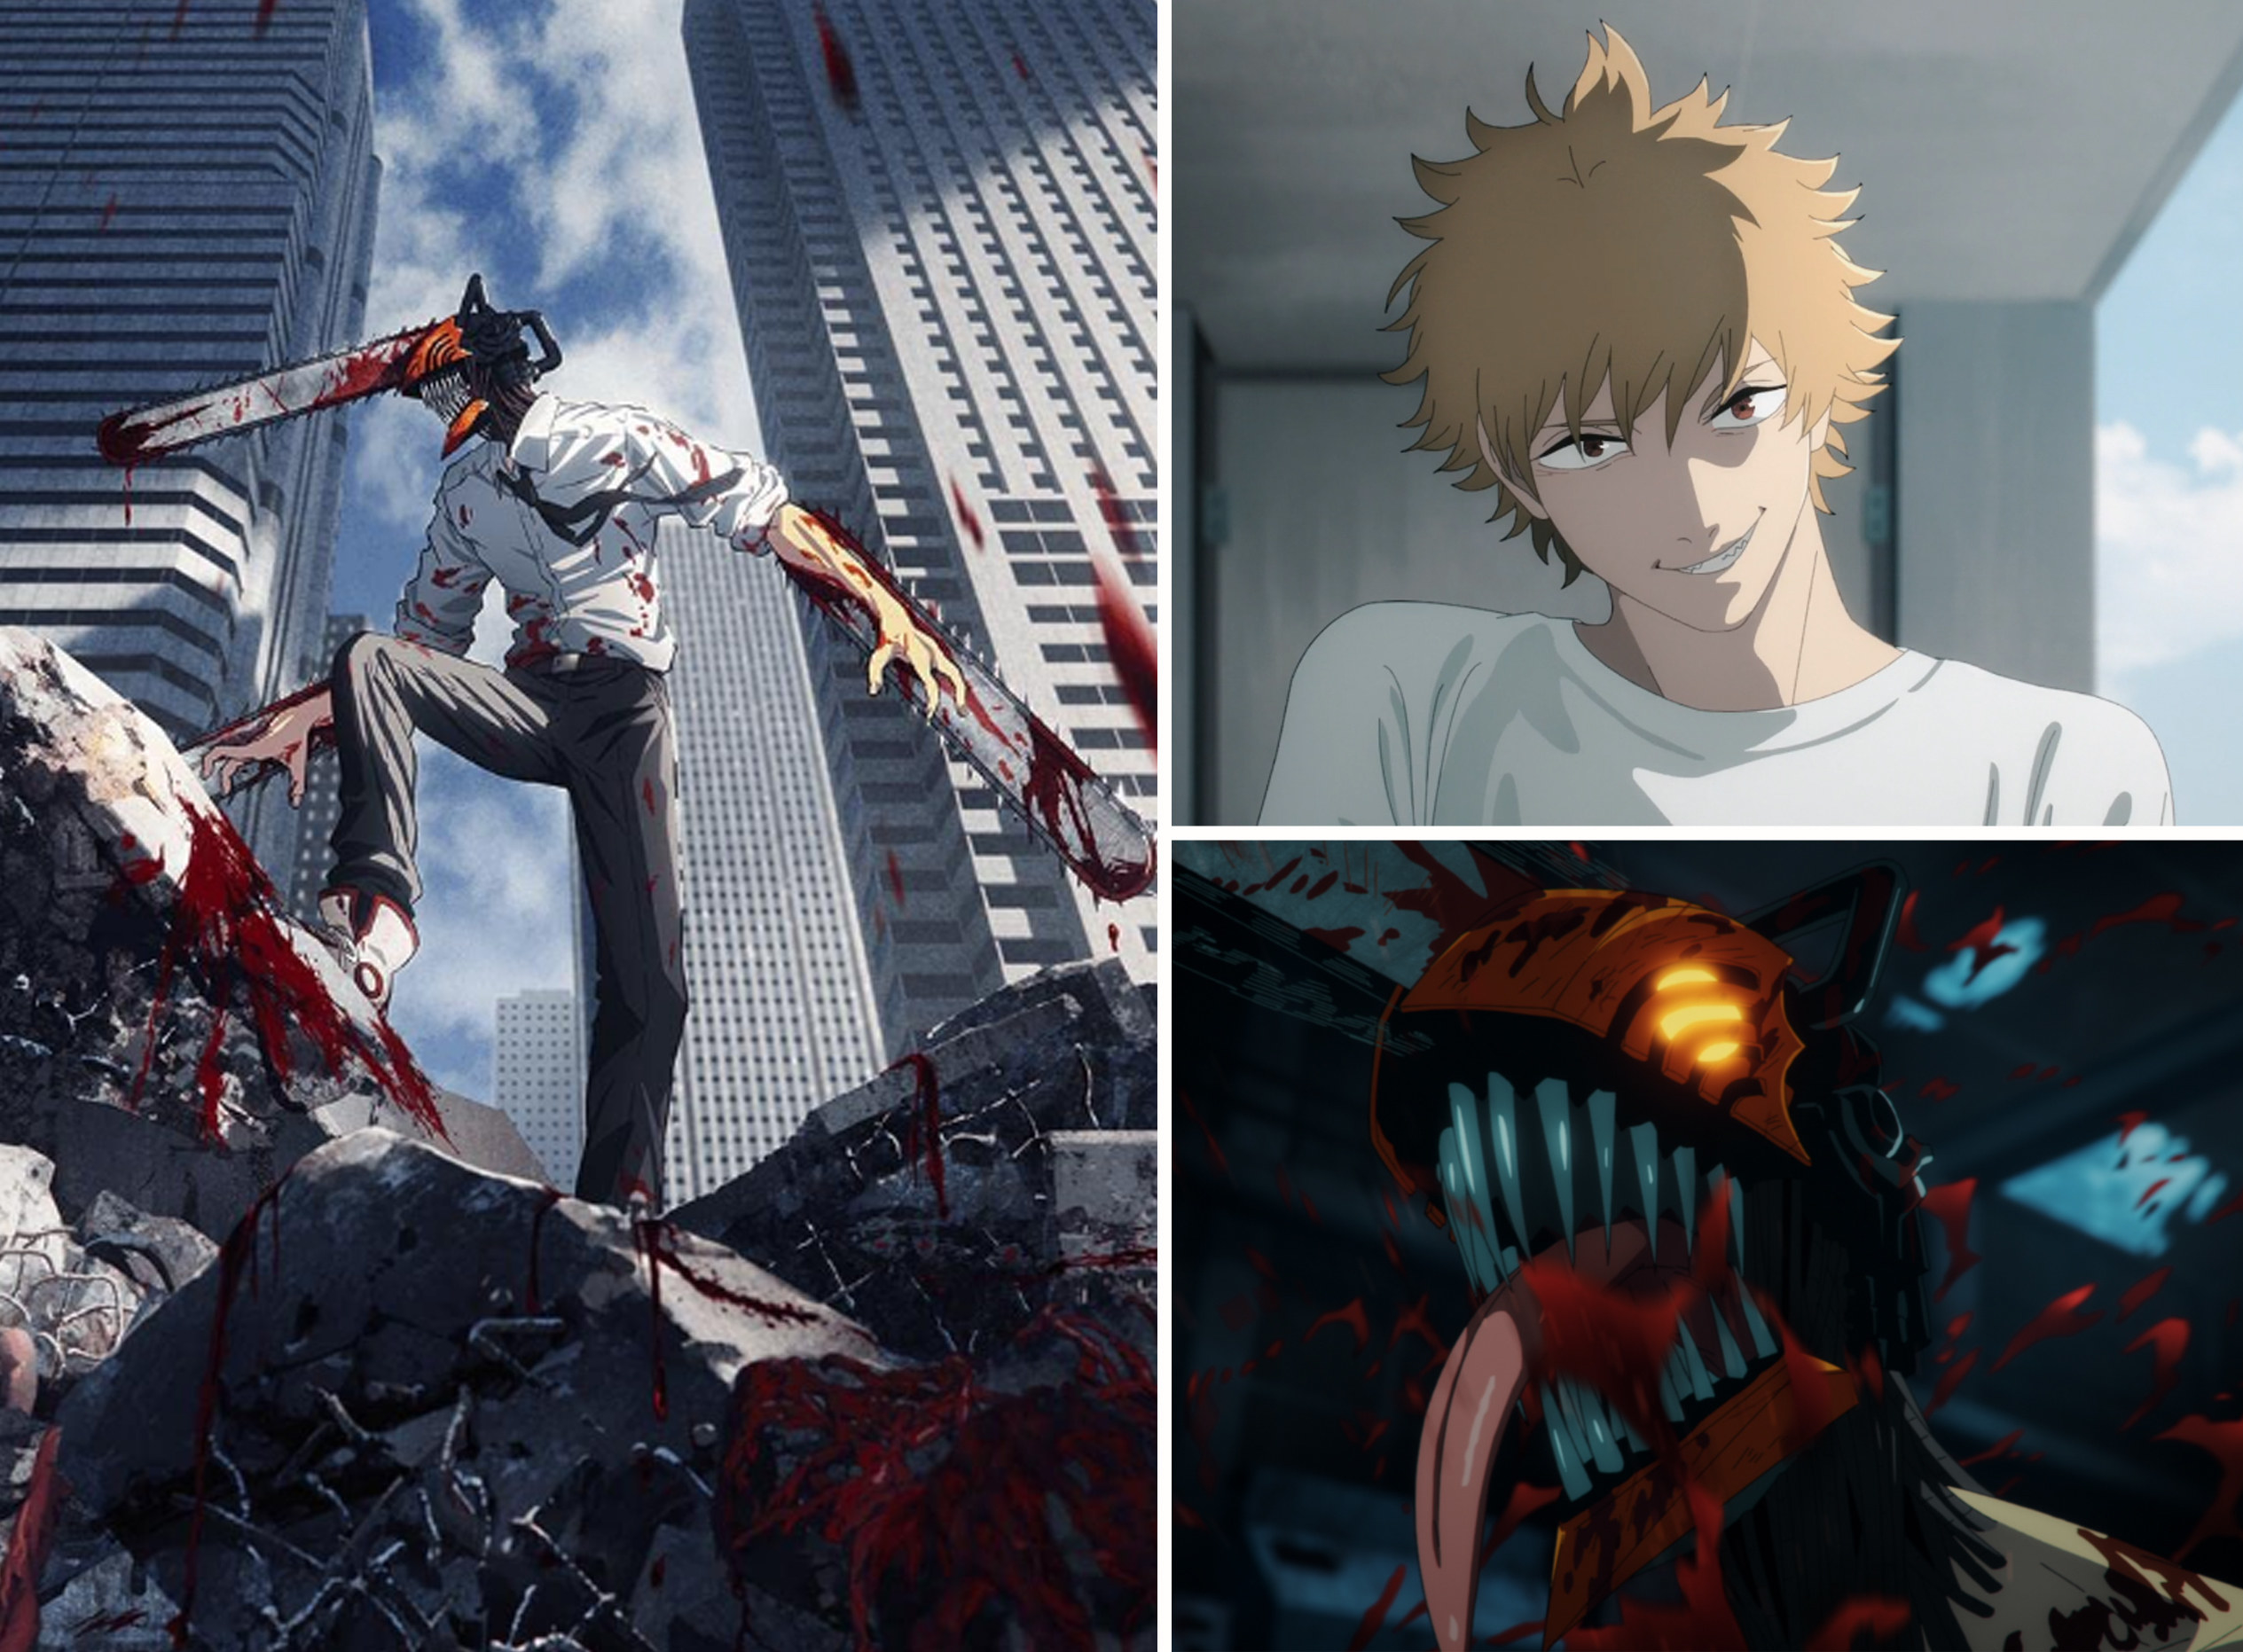 Best Anime Series And Movies Of 2022